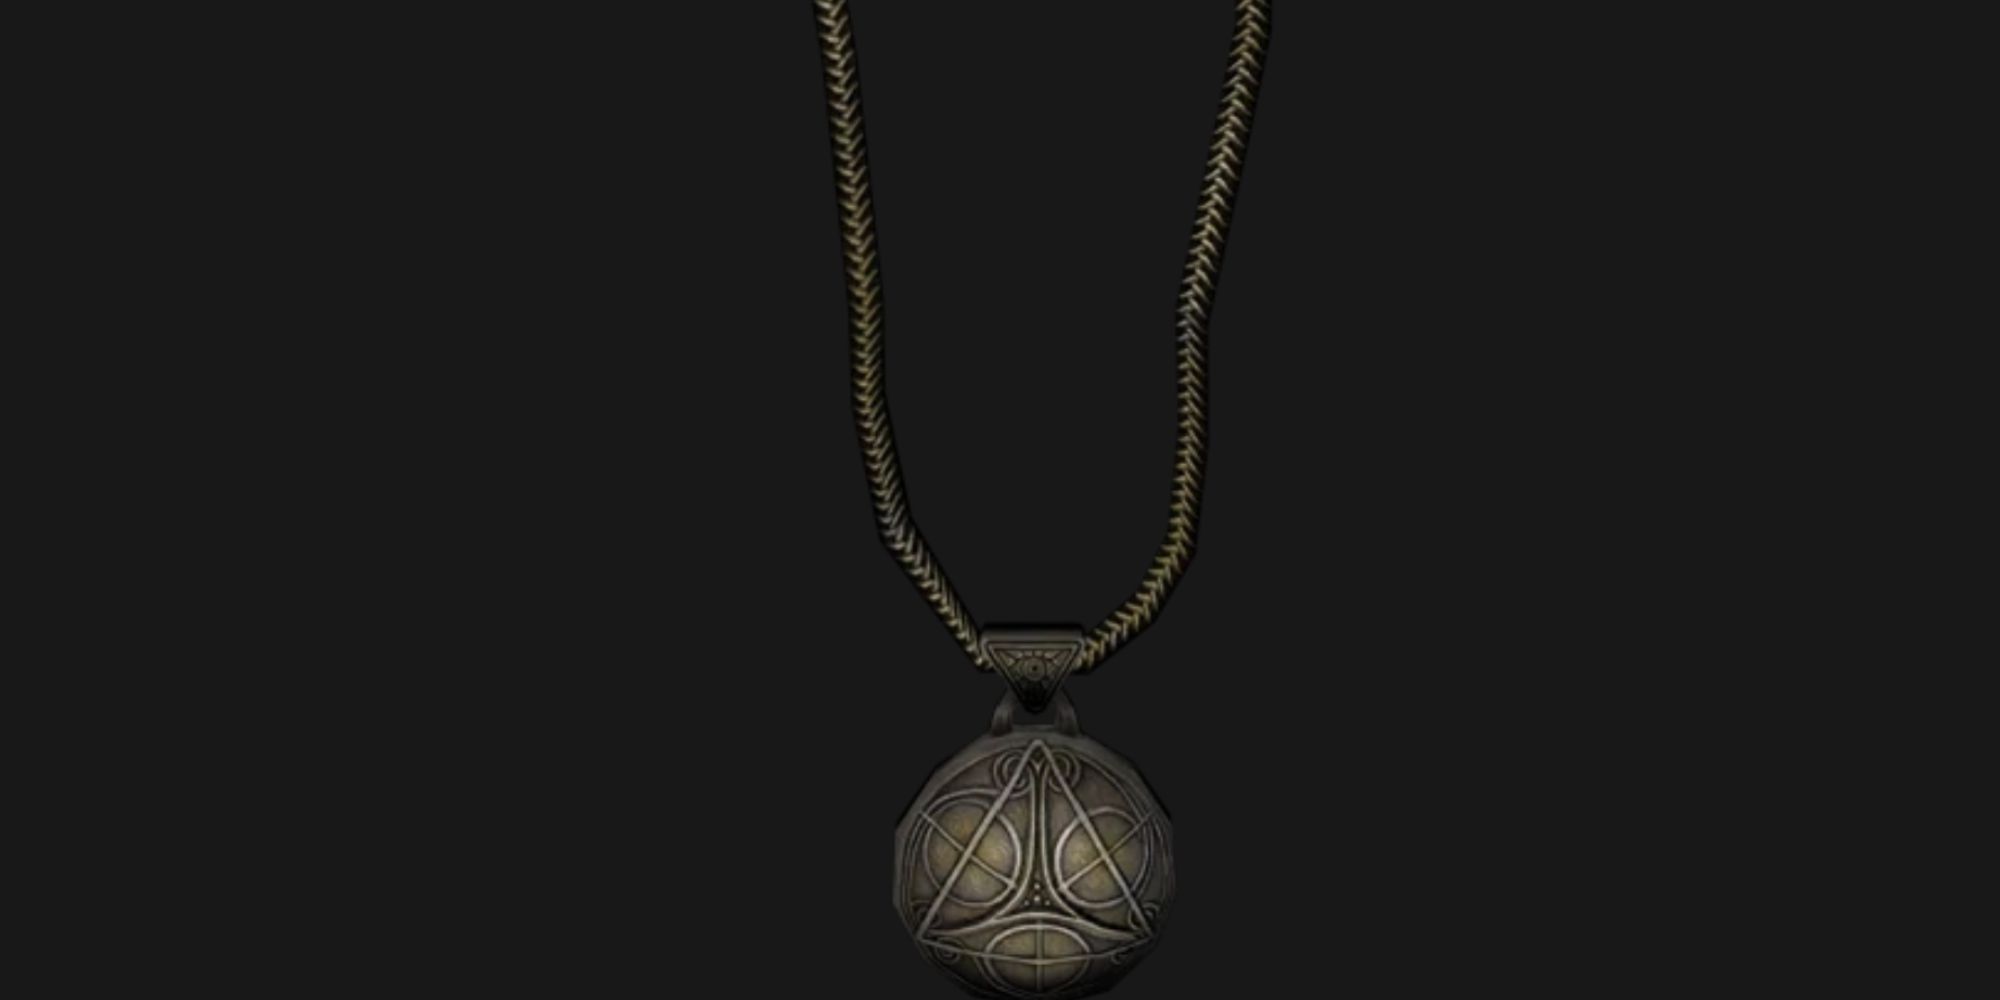 Skyrim Amulet Of Julianos With A Gray Background